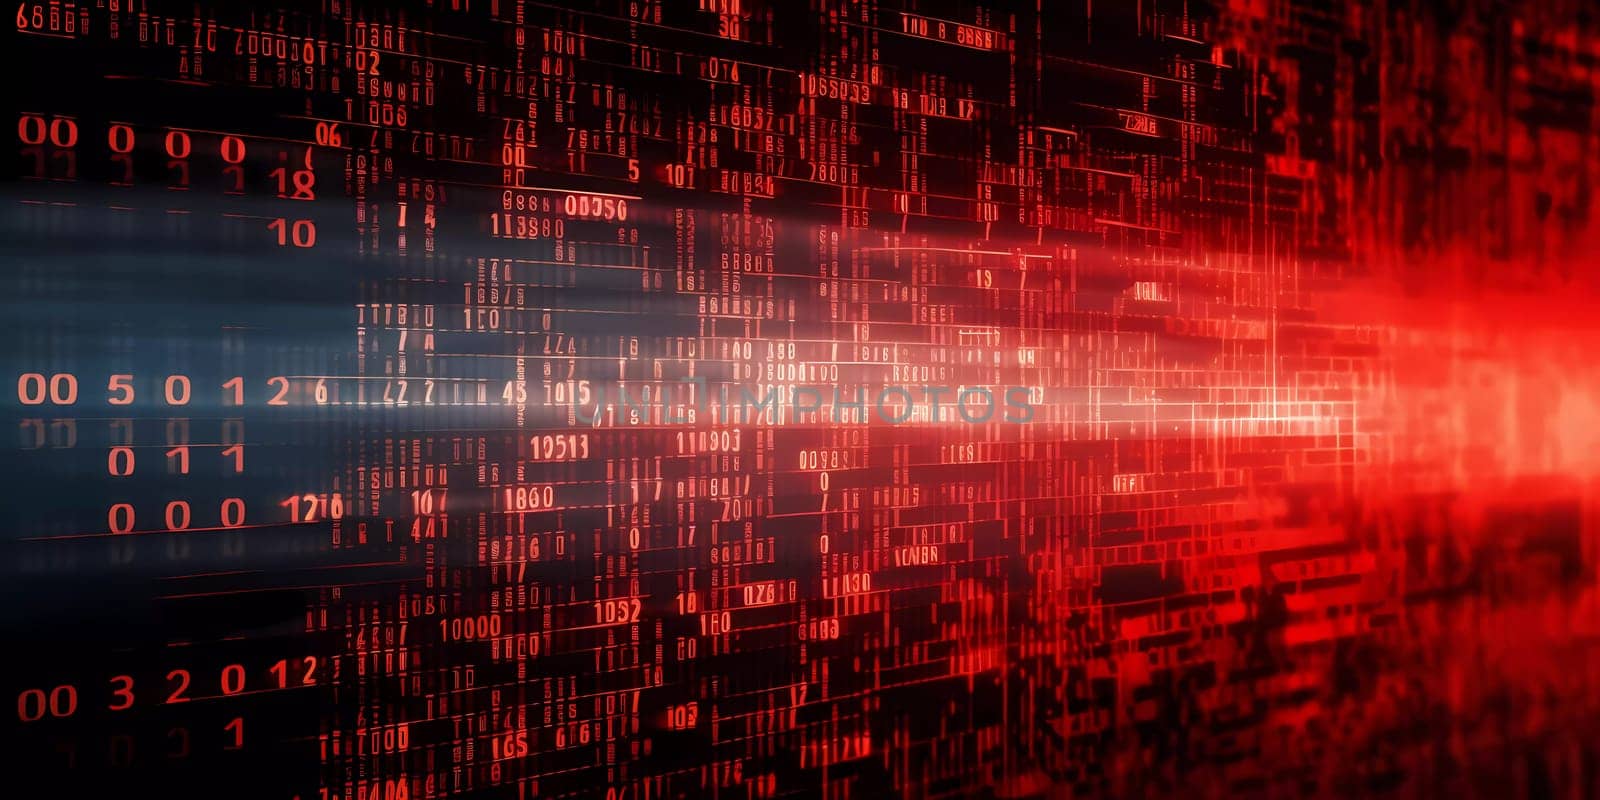 Computer background with red digits and symbols on a black background